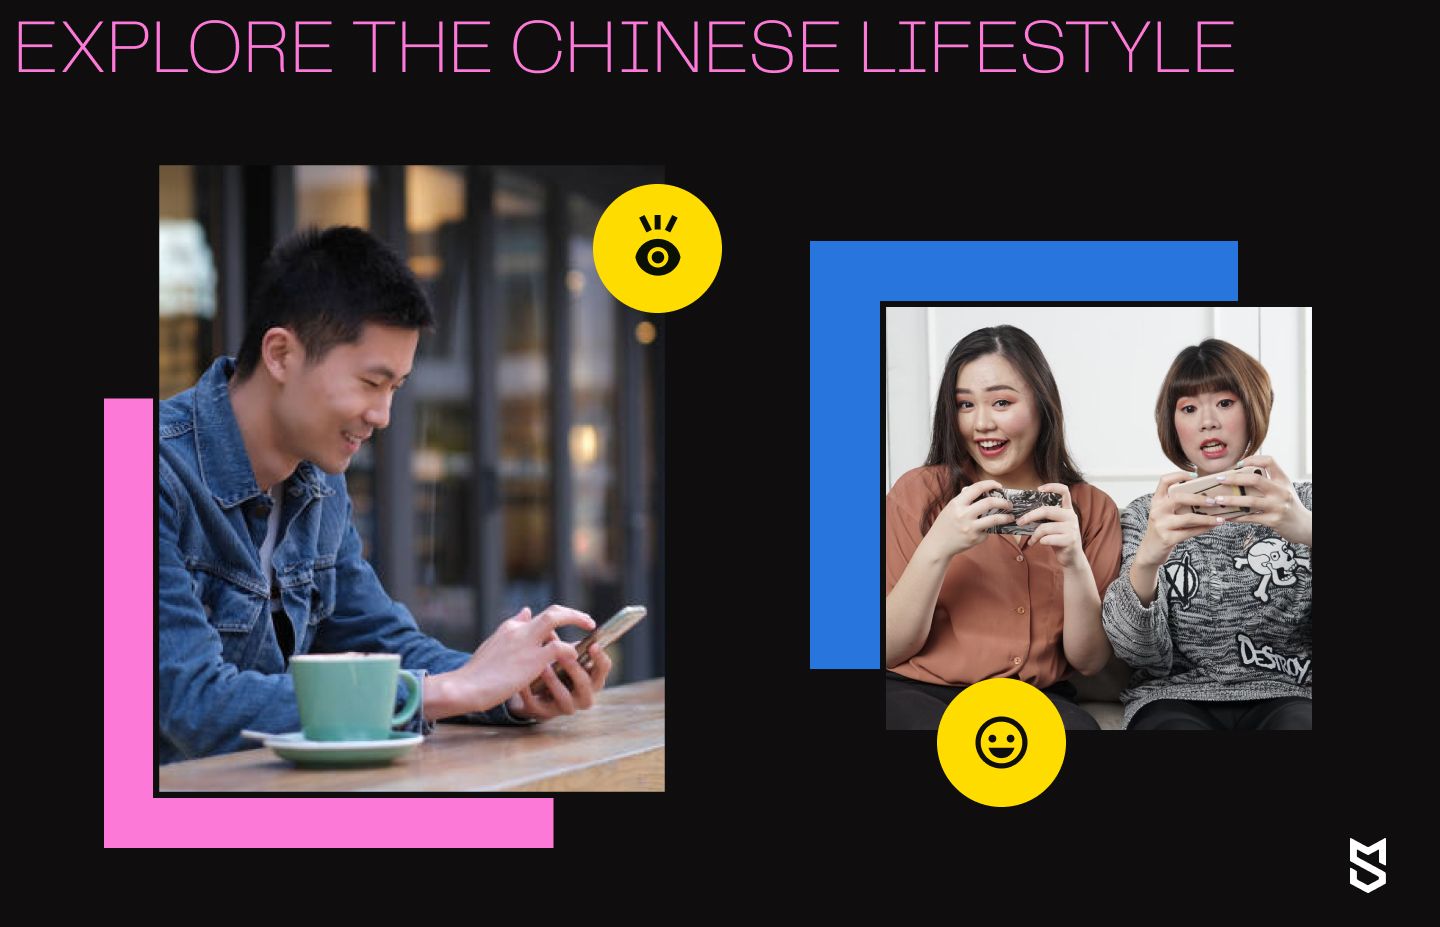 Explore the Chinese lifestyle